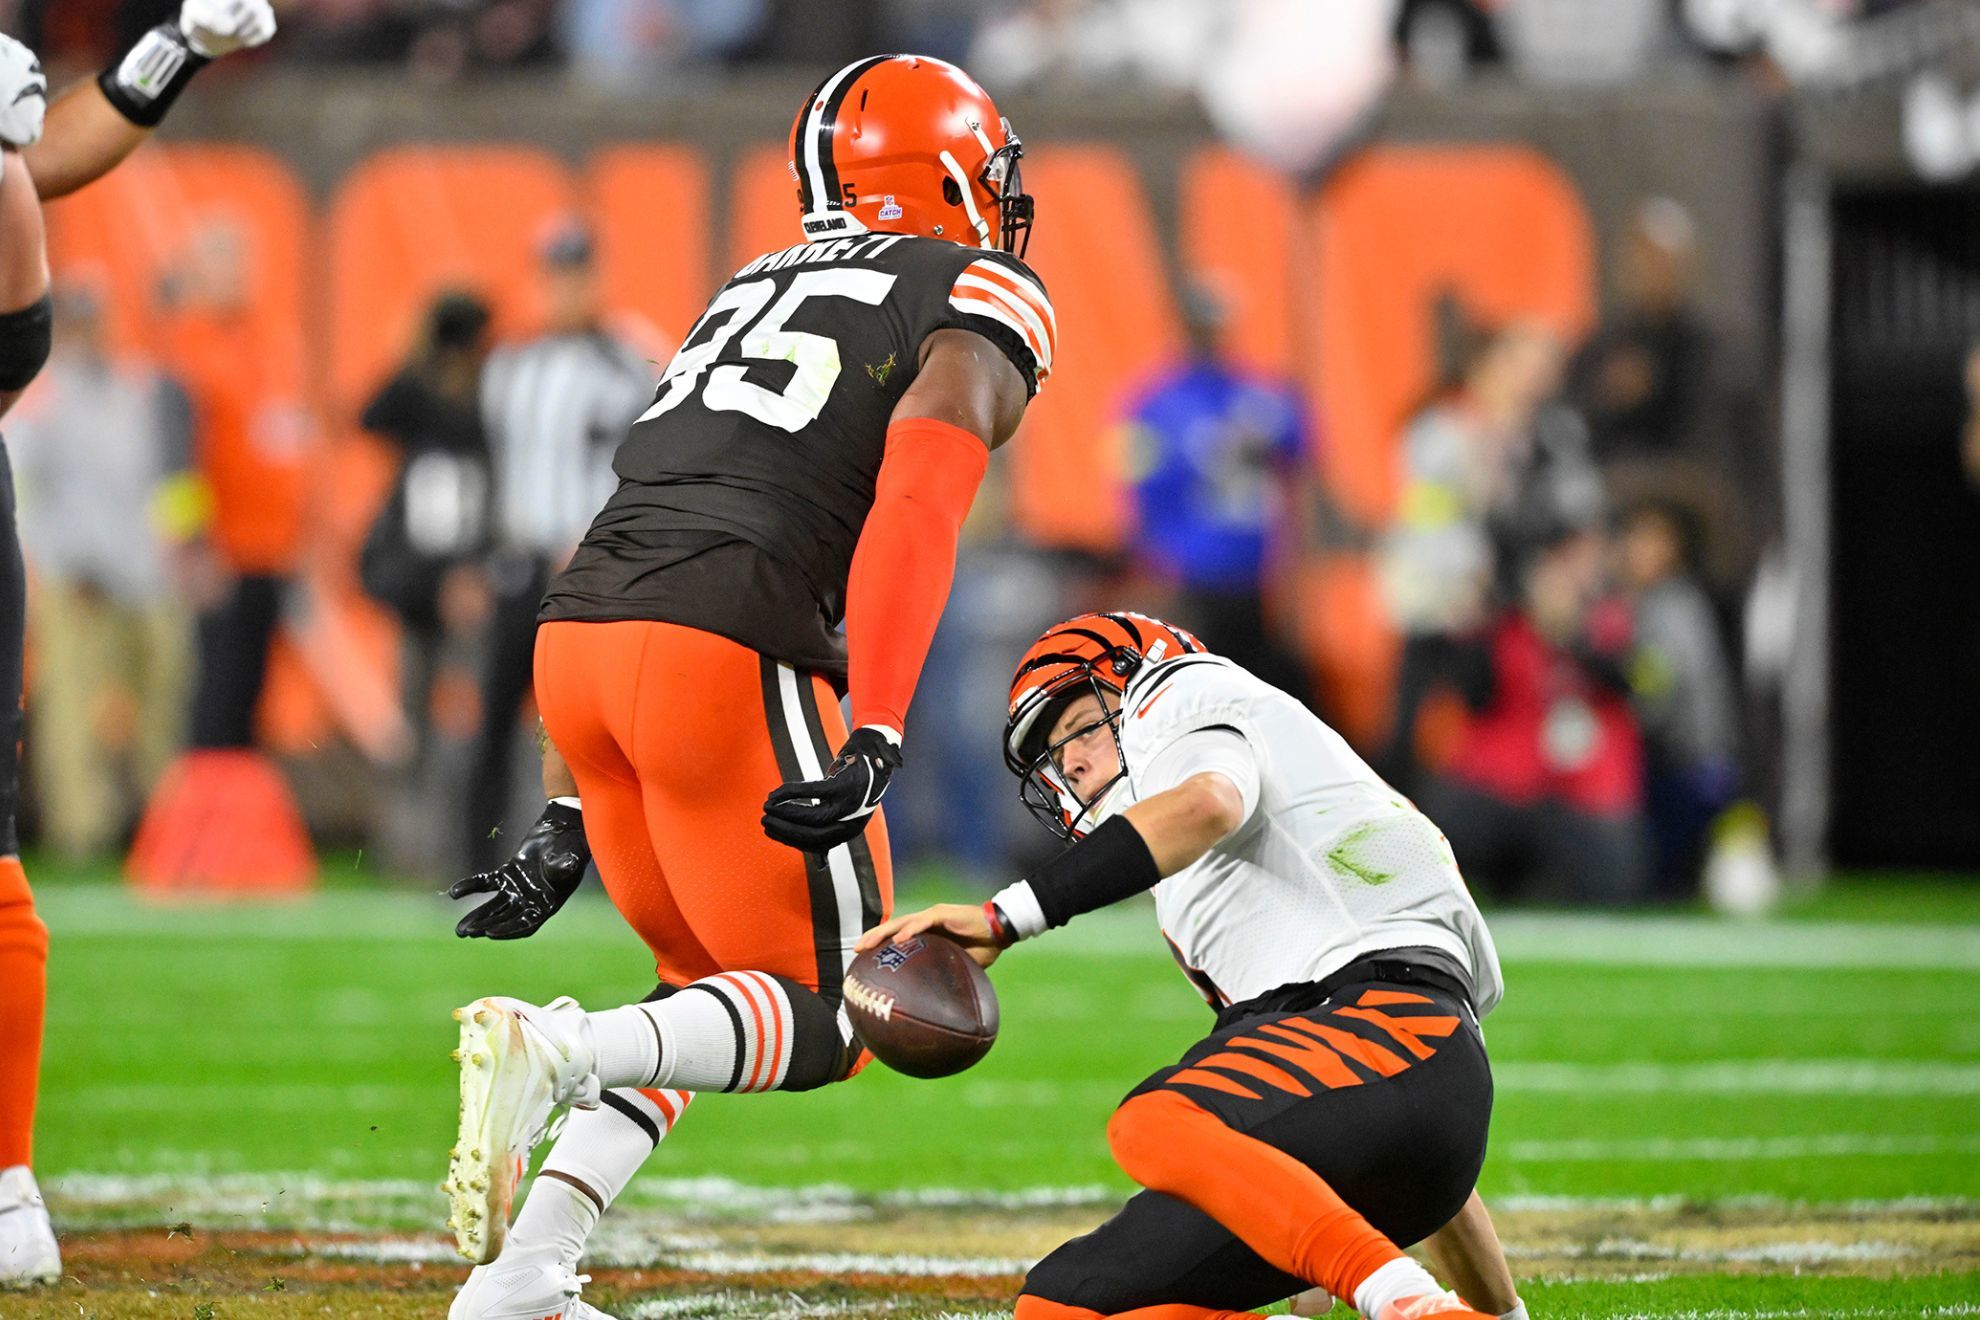 cleveland browns game live